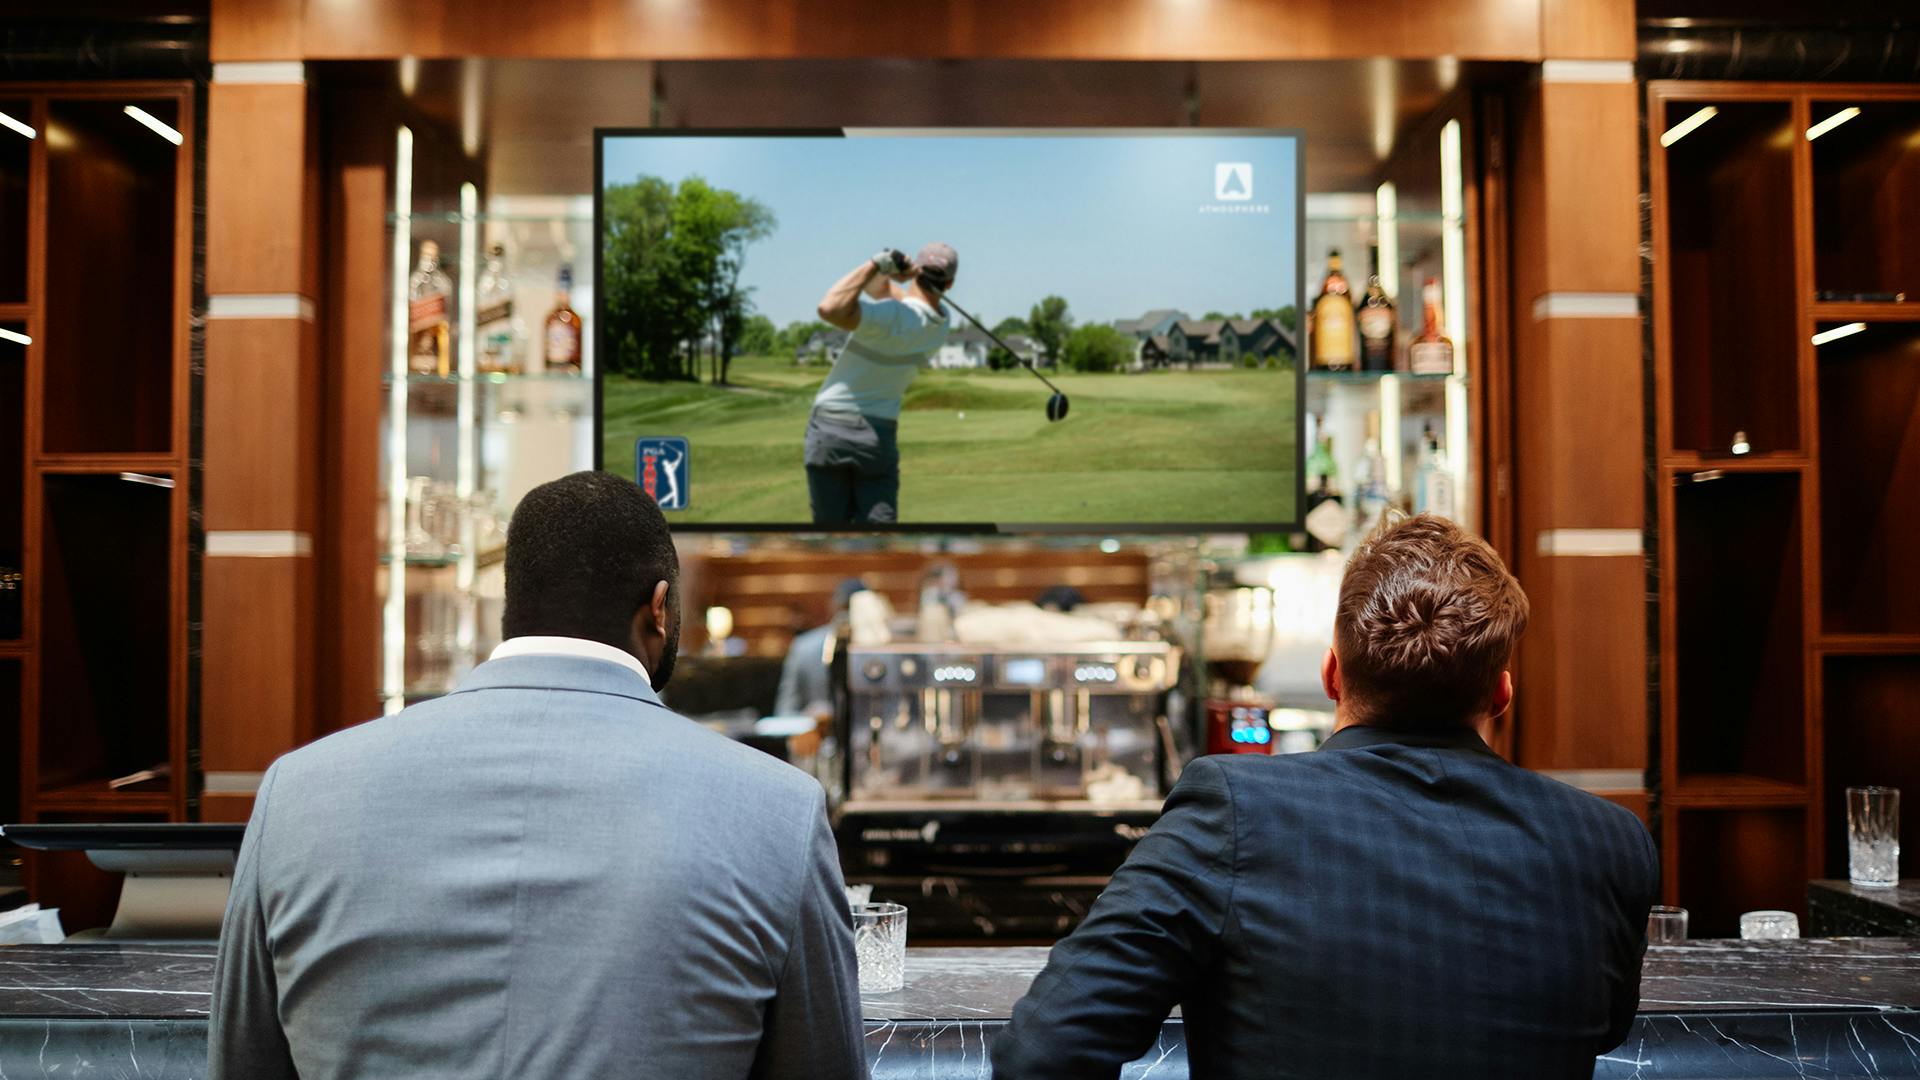 Two men sitting at a bar watching the PGA TOUR channel on Atmosphere TV